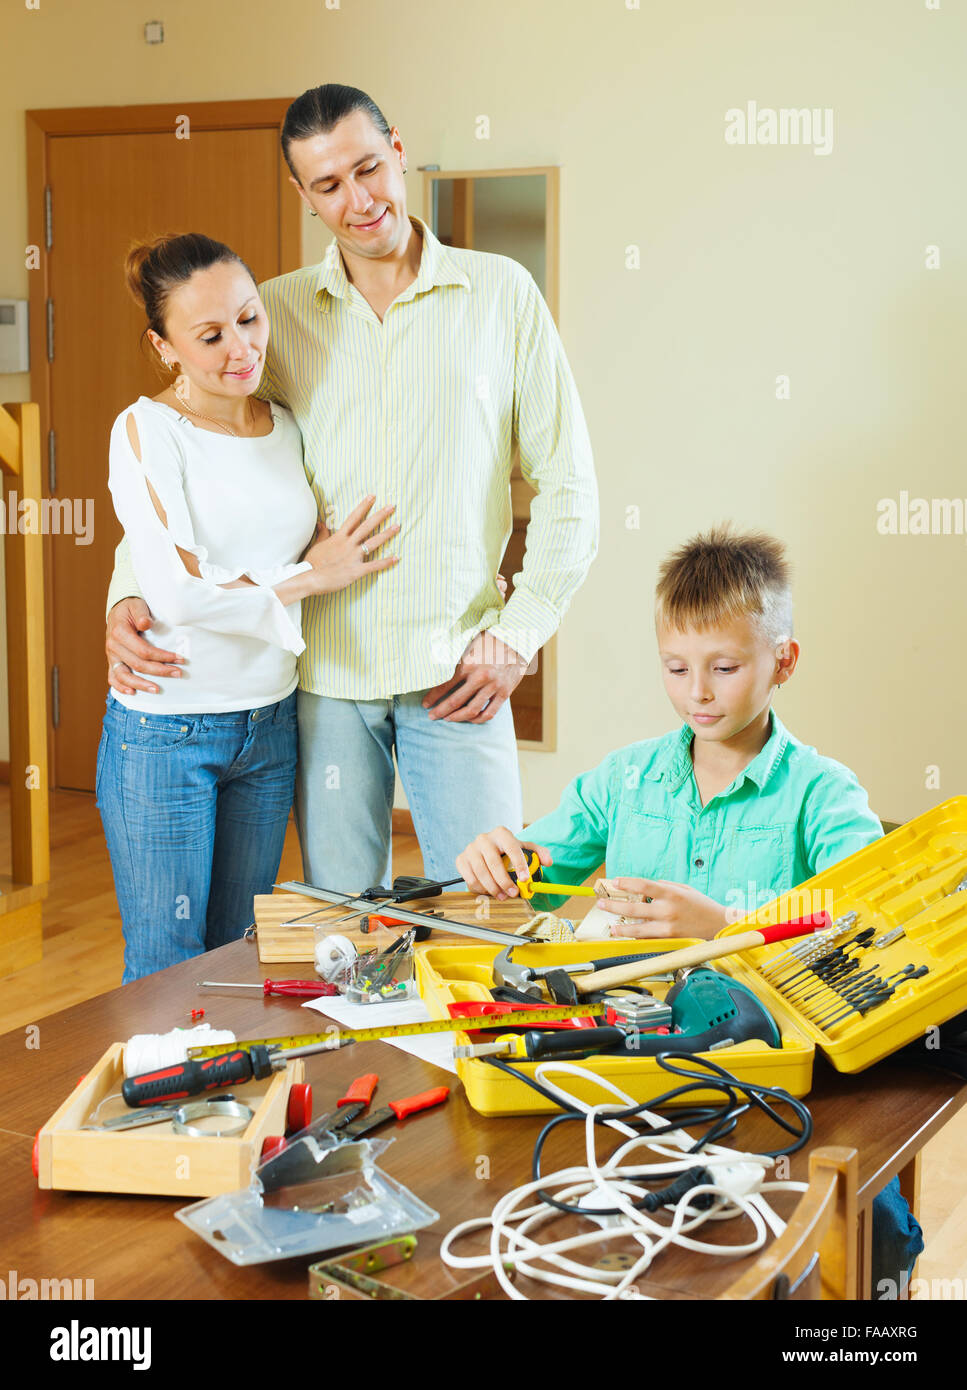 The teenager is doing something with their hands, the parents are watching Stock Photo